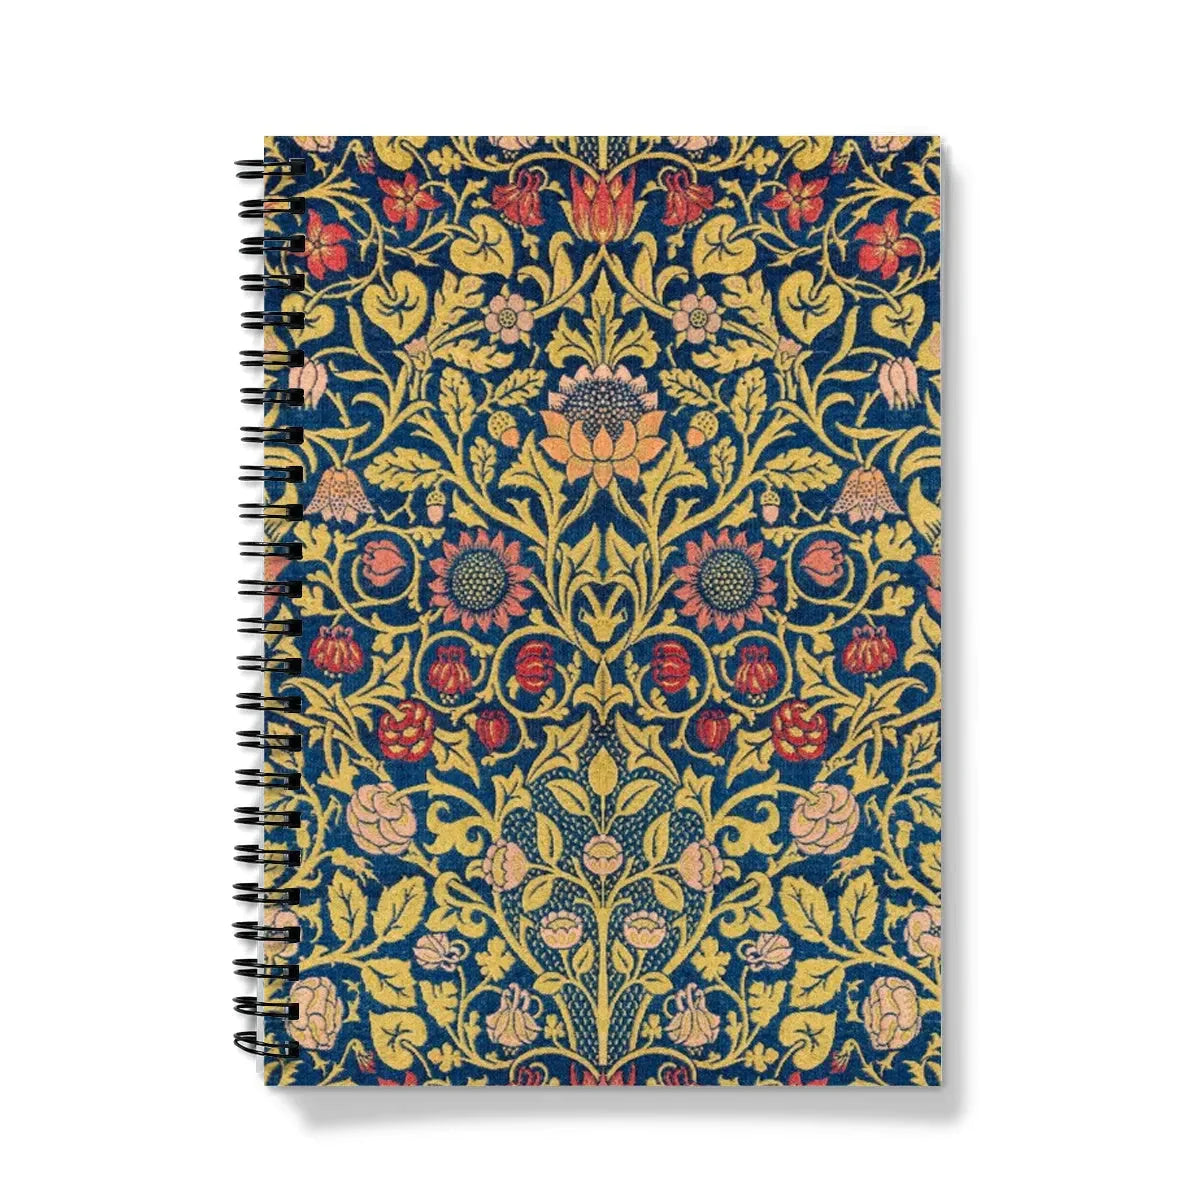 Violet And Columbine By William Morris Notebook - A5 / Graph - Notebooks & Notepads - Aesthetic Art